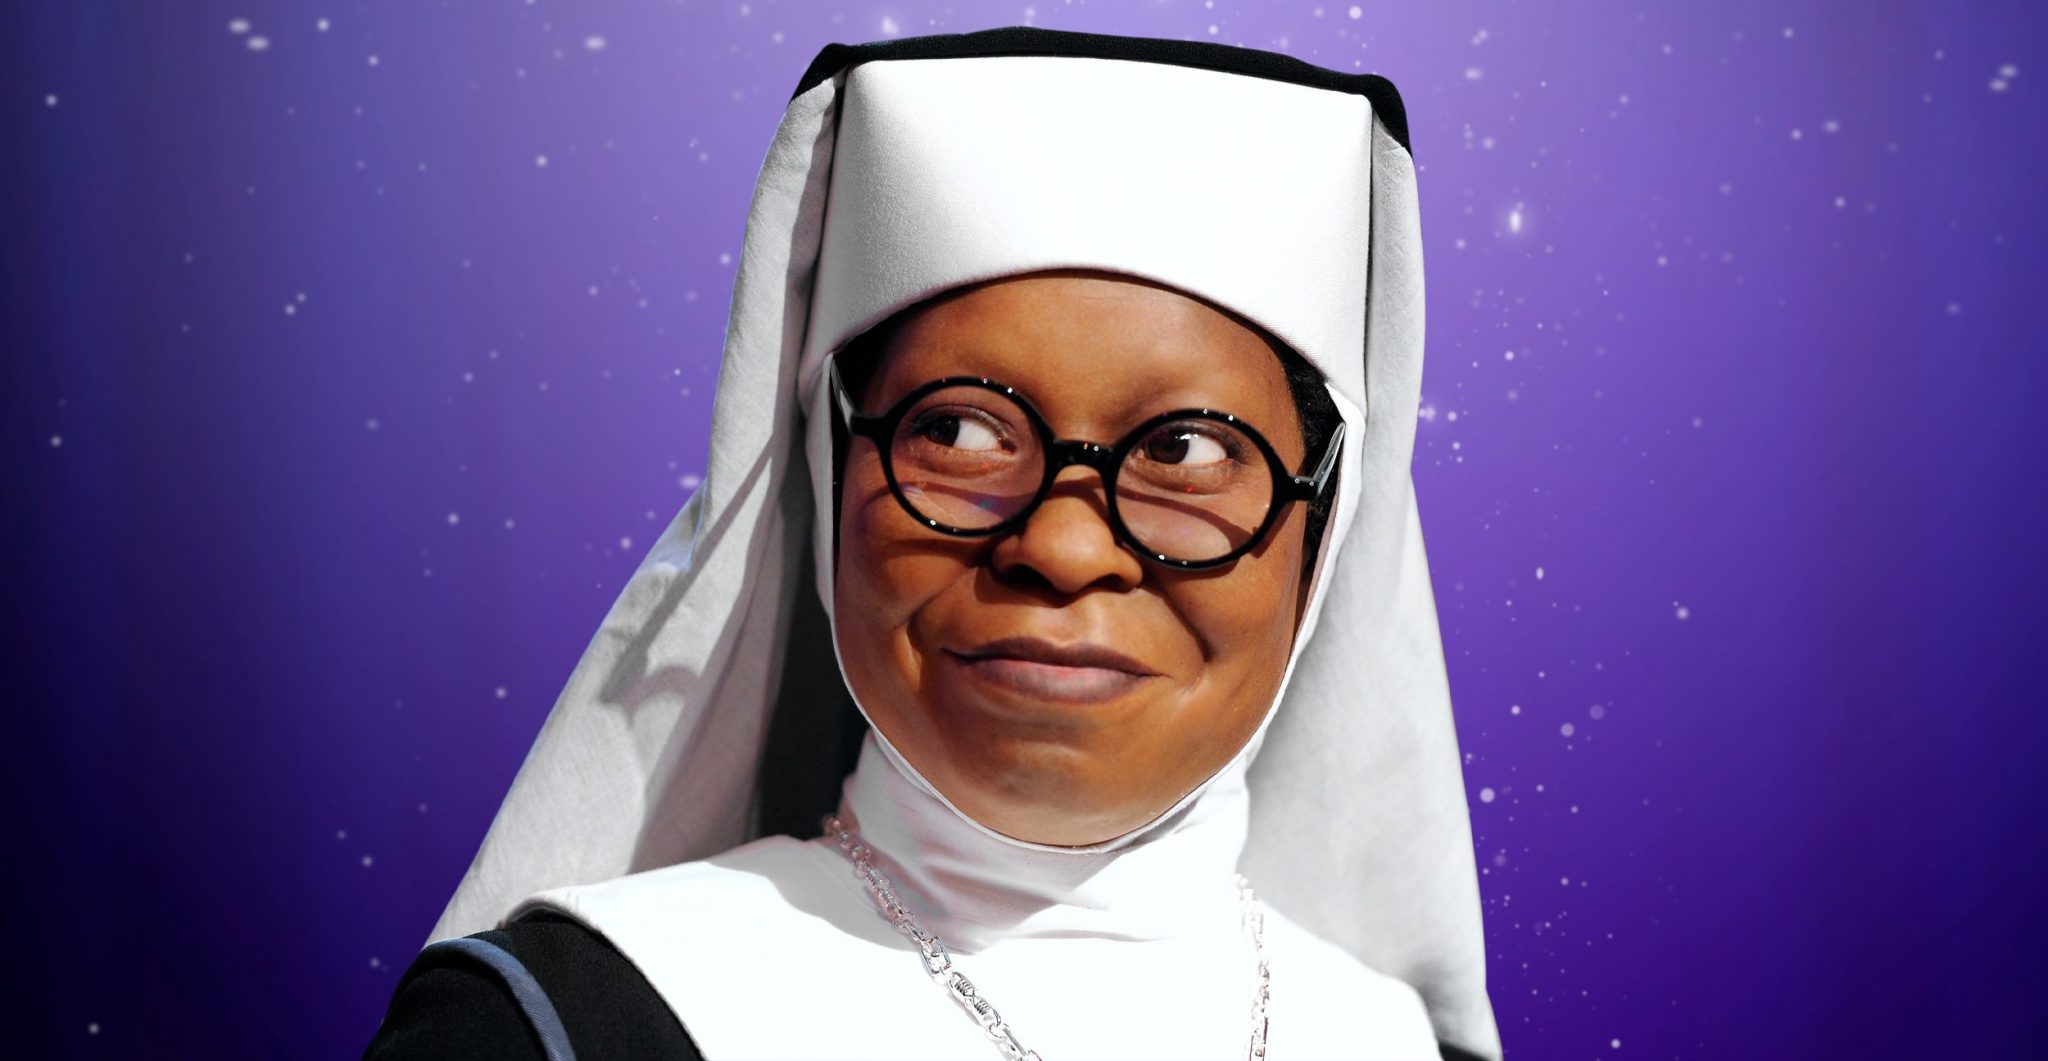 Whoopi Goldberg in the Sister Act musical. Getty Images